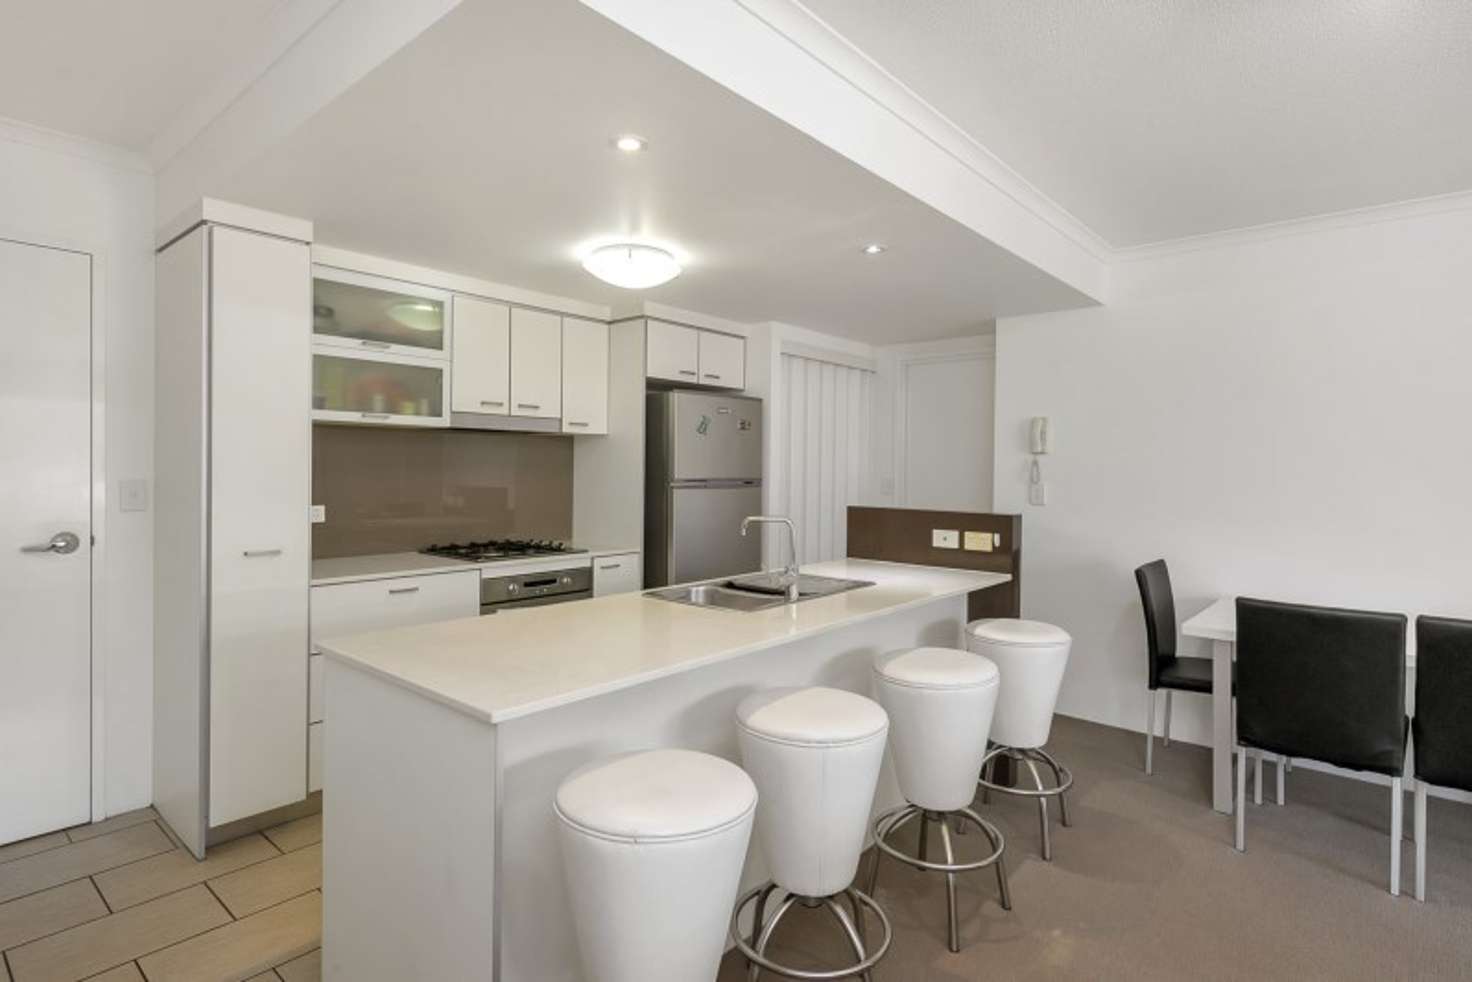 Main view of Homely apartment listing, 208/6 Exford Street, Brisbane QLD 4000